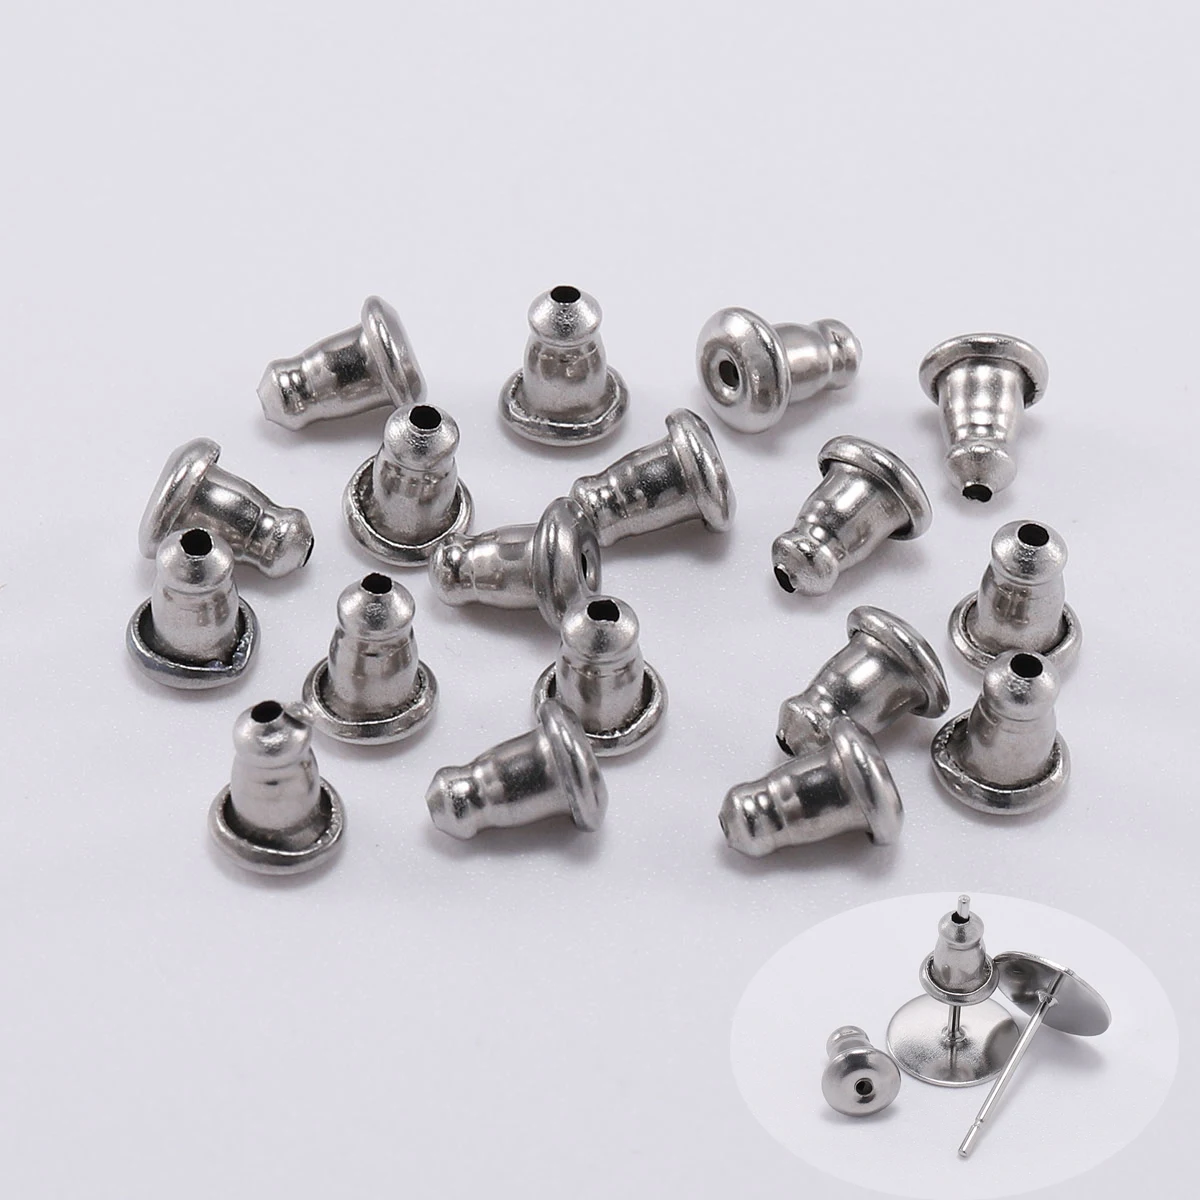 

50Pcs/Lot Metal Stainless Steel Stopper Scrolls Ear Post Nuts Earring Studs Backs for DIY Jewelry Making Accessories Supplies